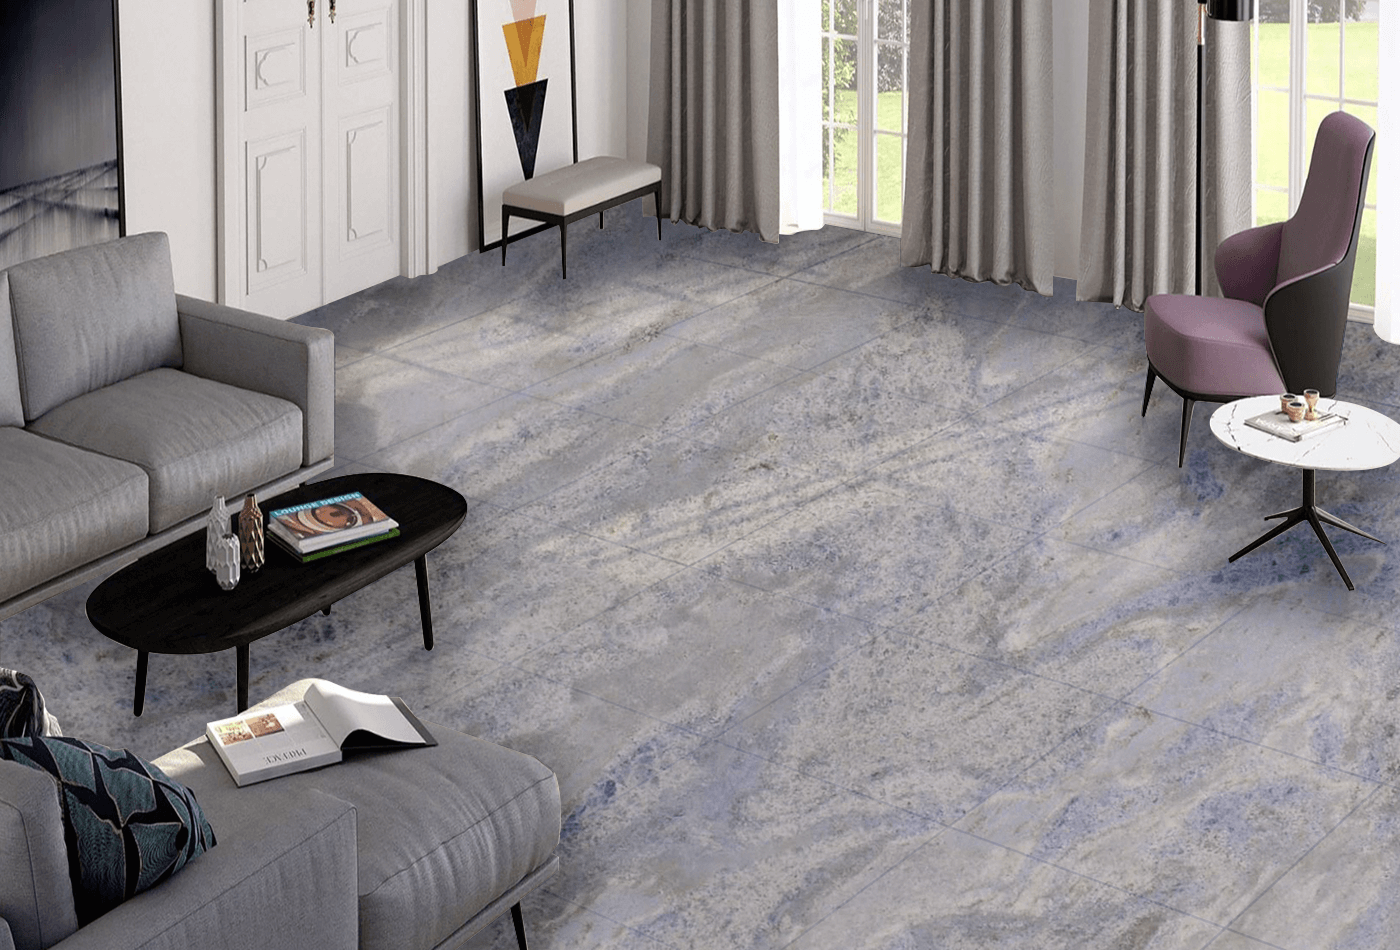 Australis Bookmatch Marble; Bring in Some Grandiose Look